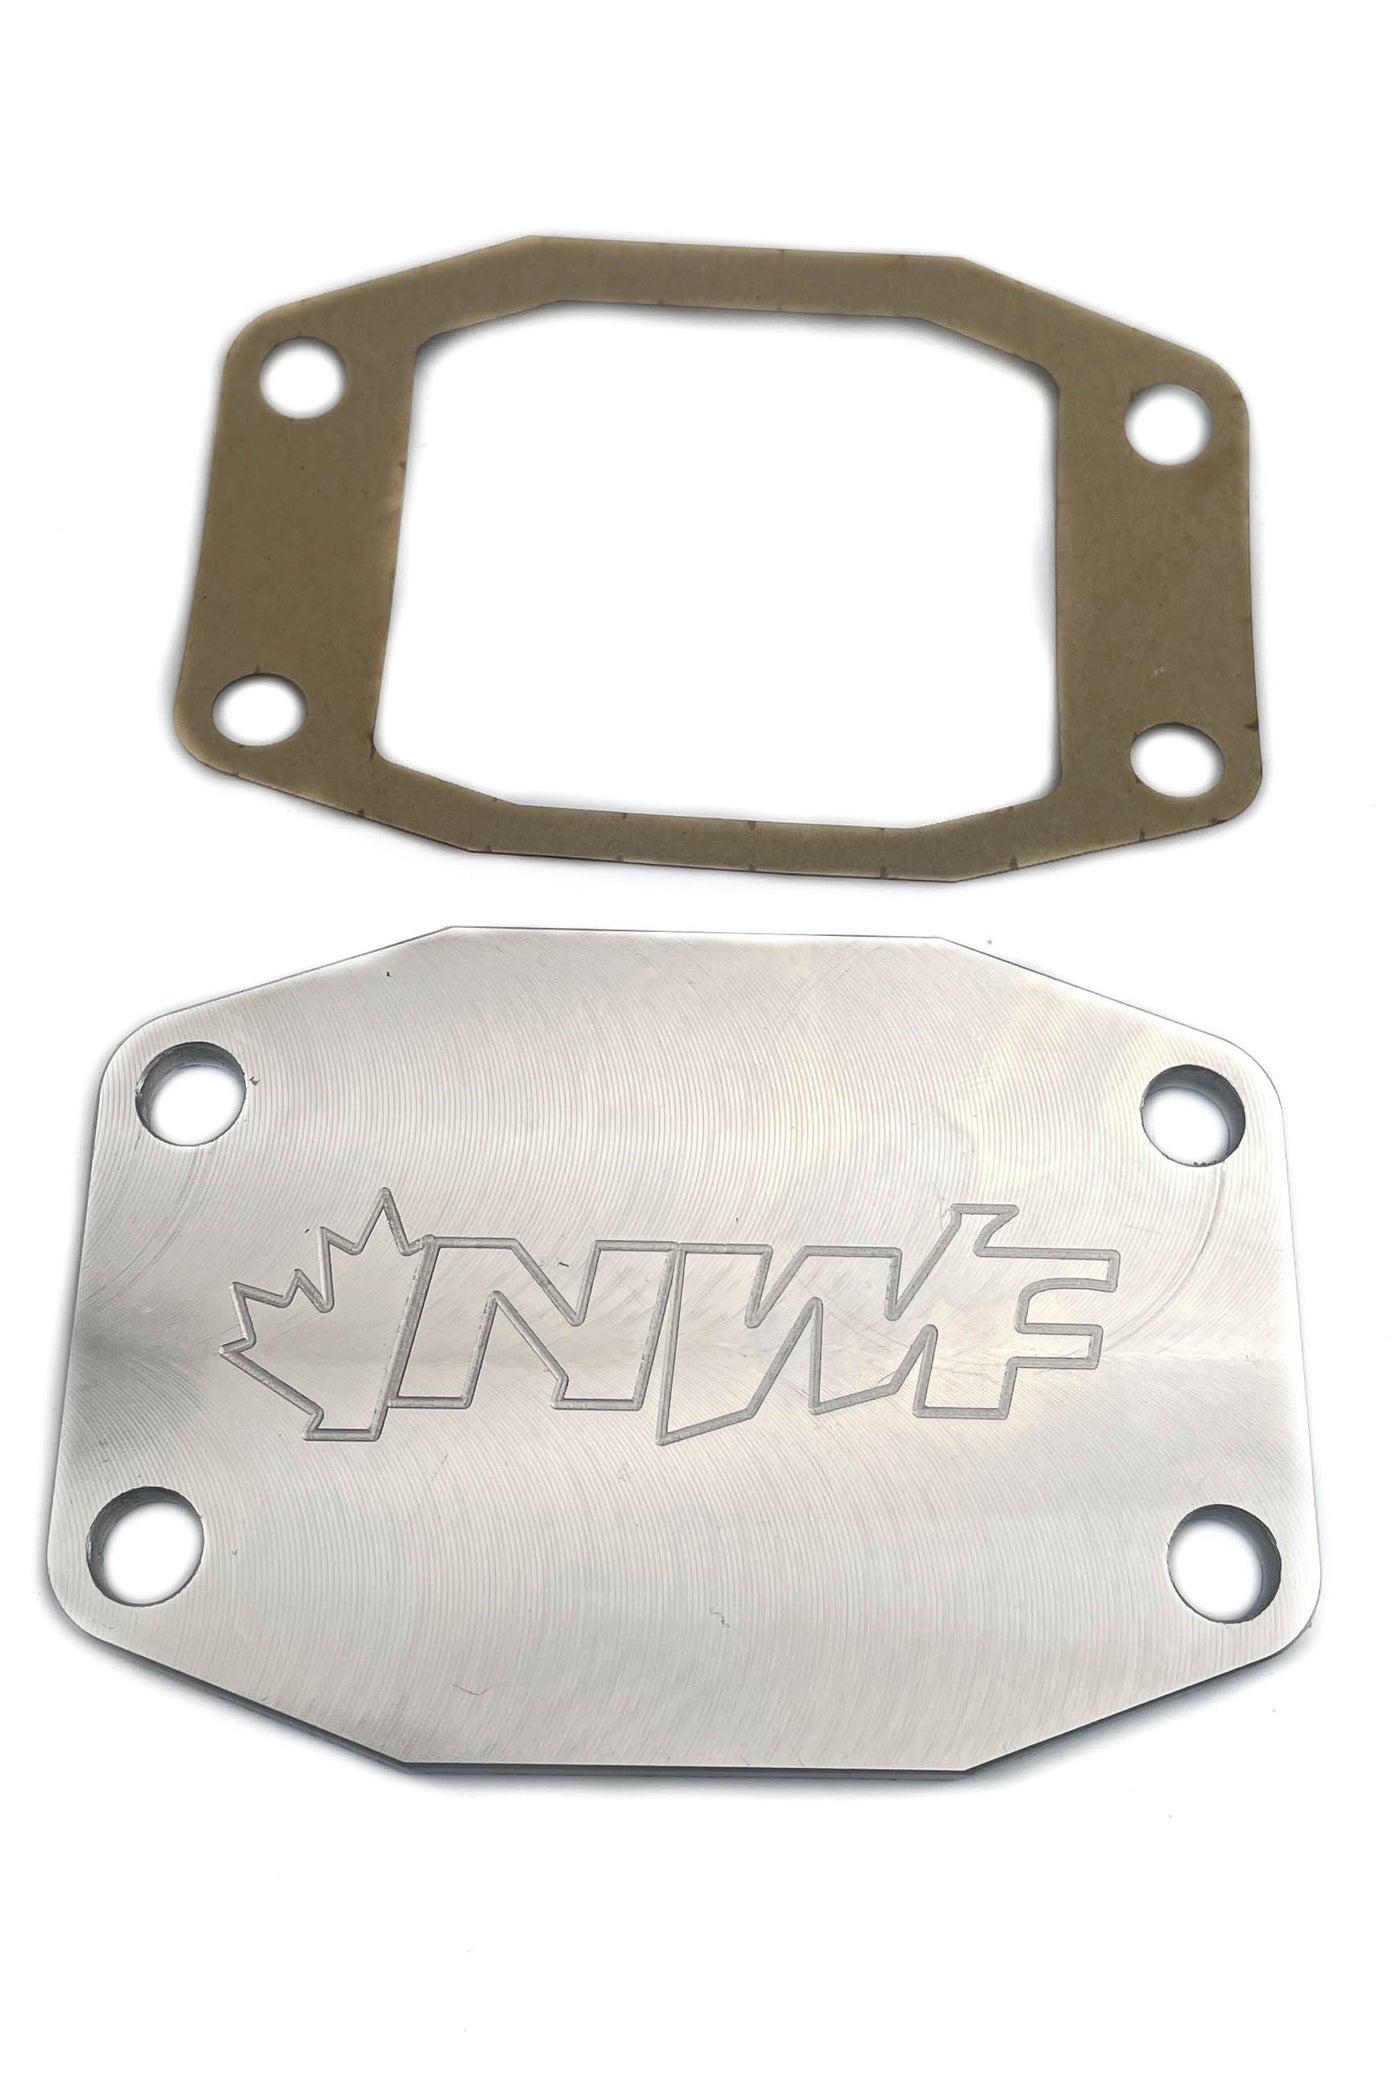 Toyota R-Series Billet Shifter Cover